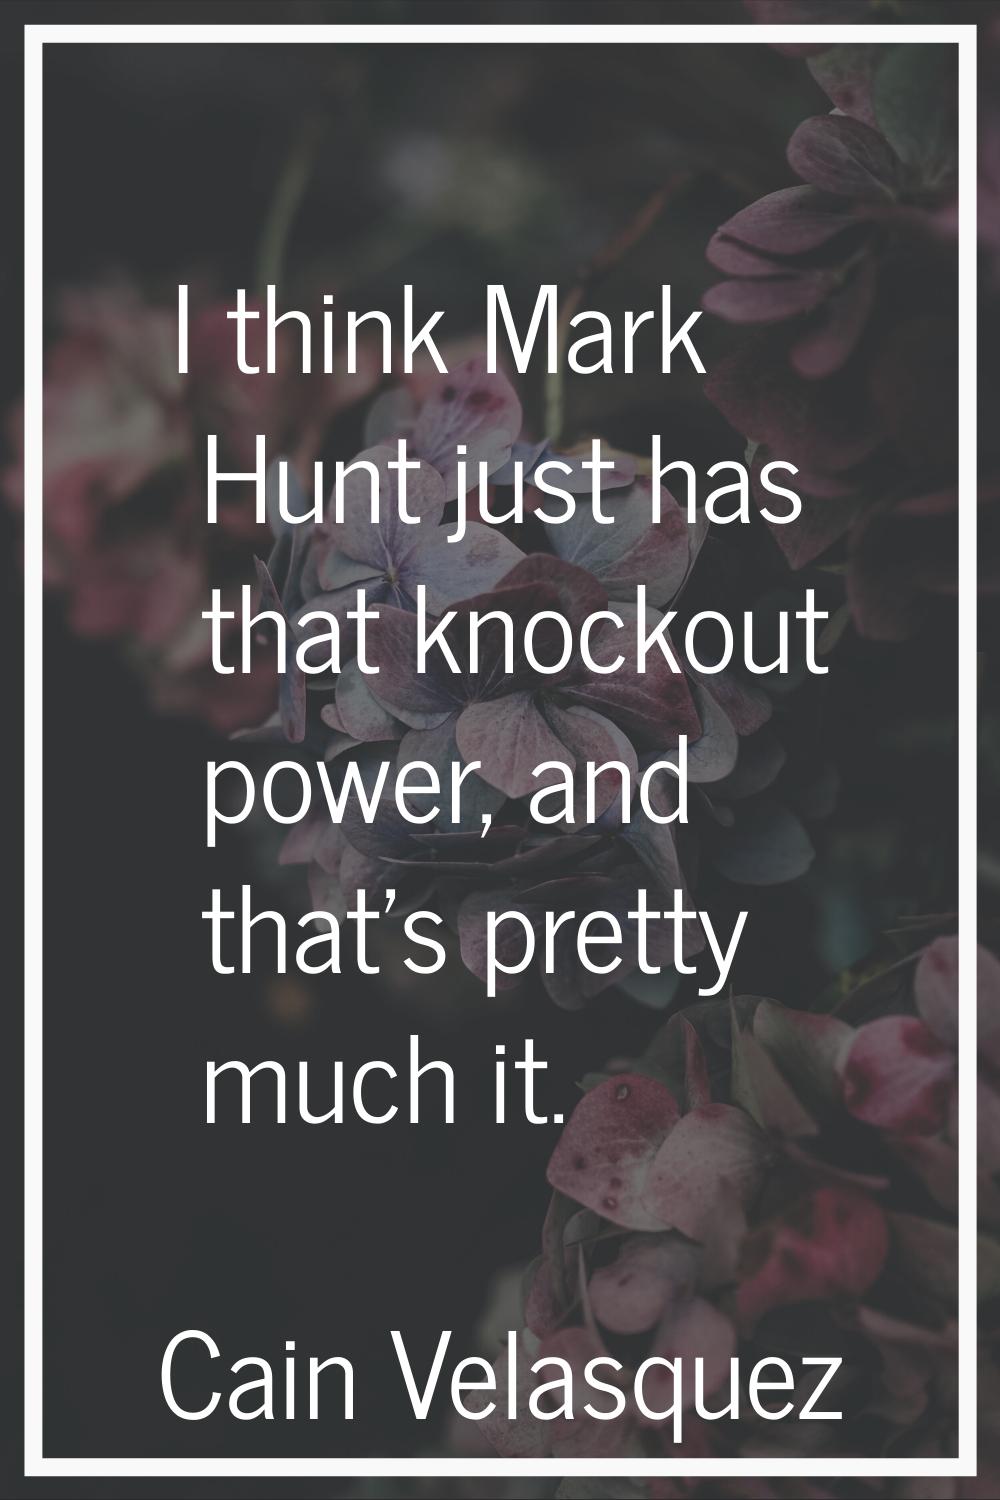 I think Mark Hunt just has that knockout power, and that's pretty much it.